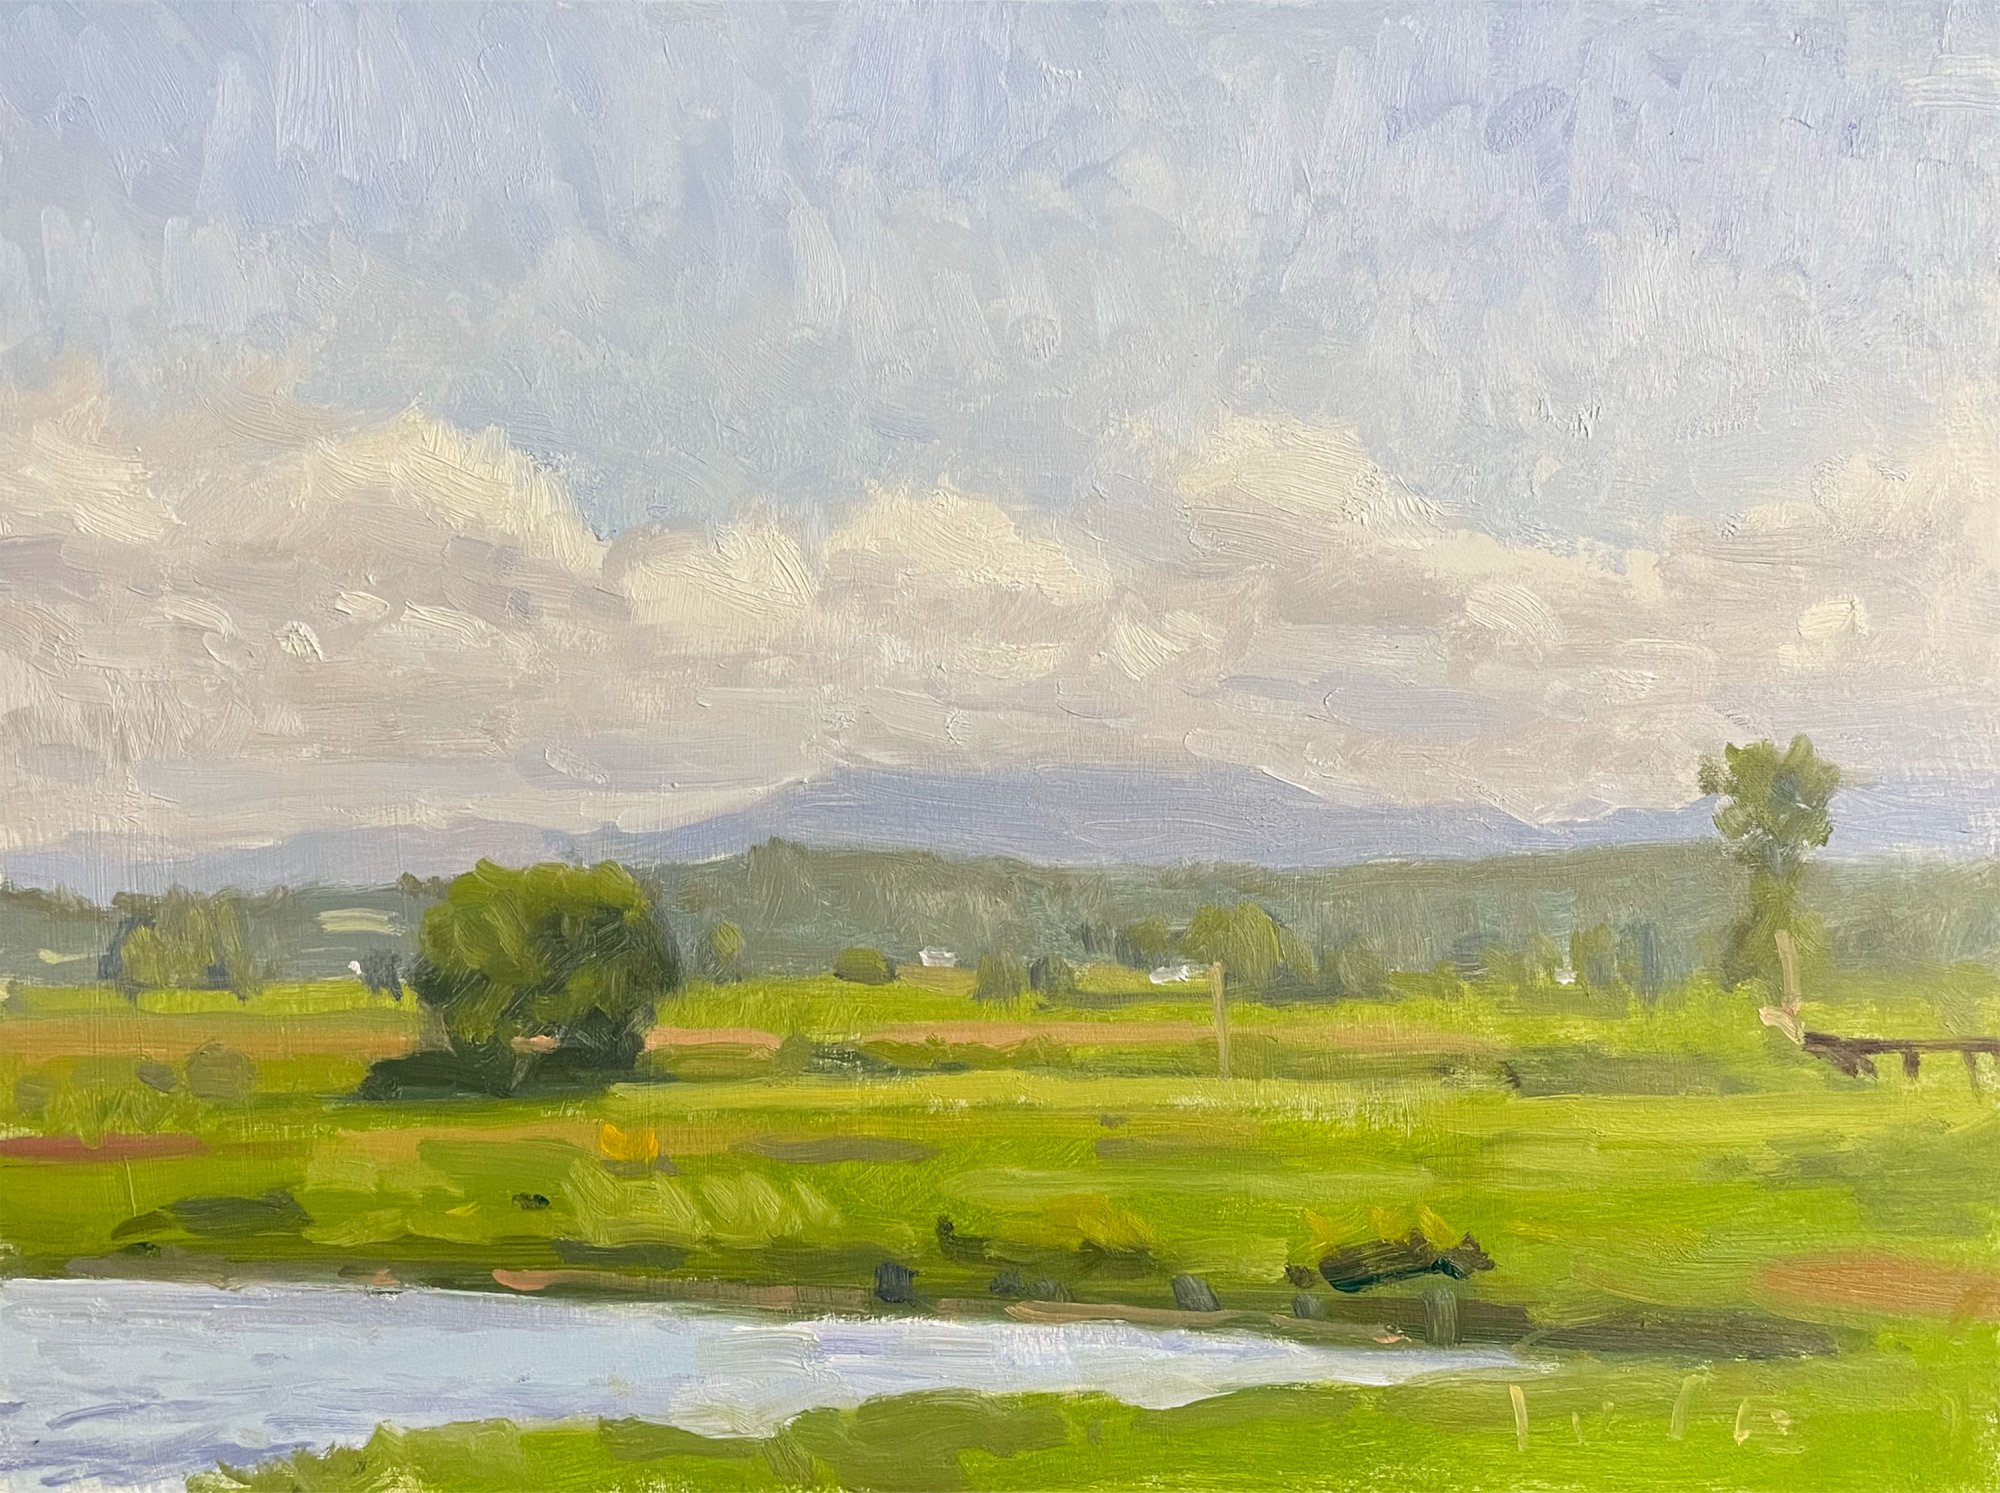 Mount Baker Behind The Clouds, oil on panel, 12 x 15 inches, copyright ©2022